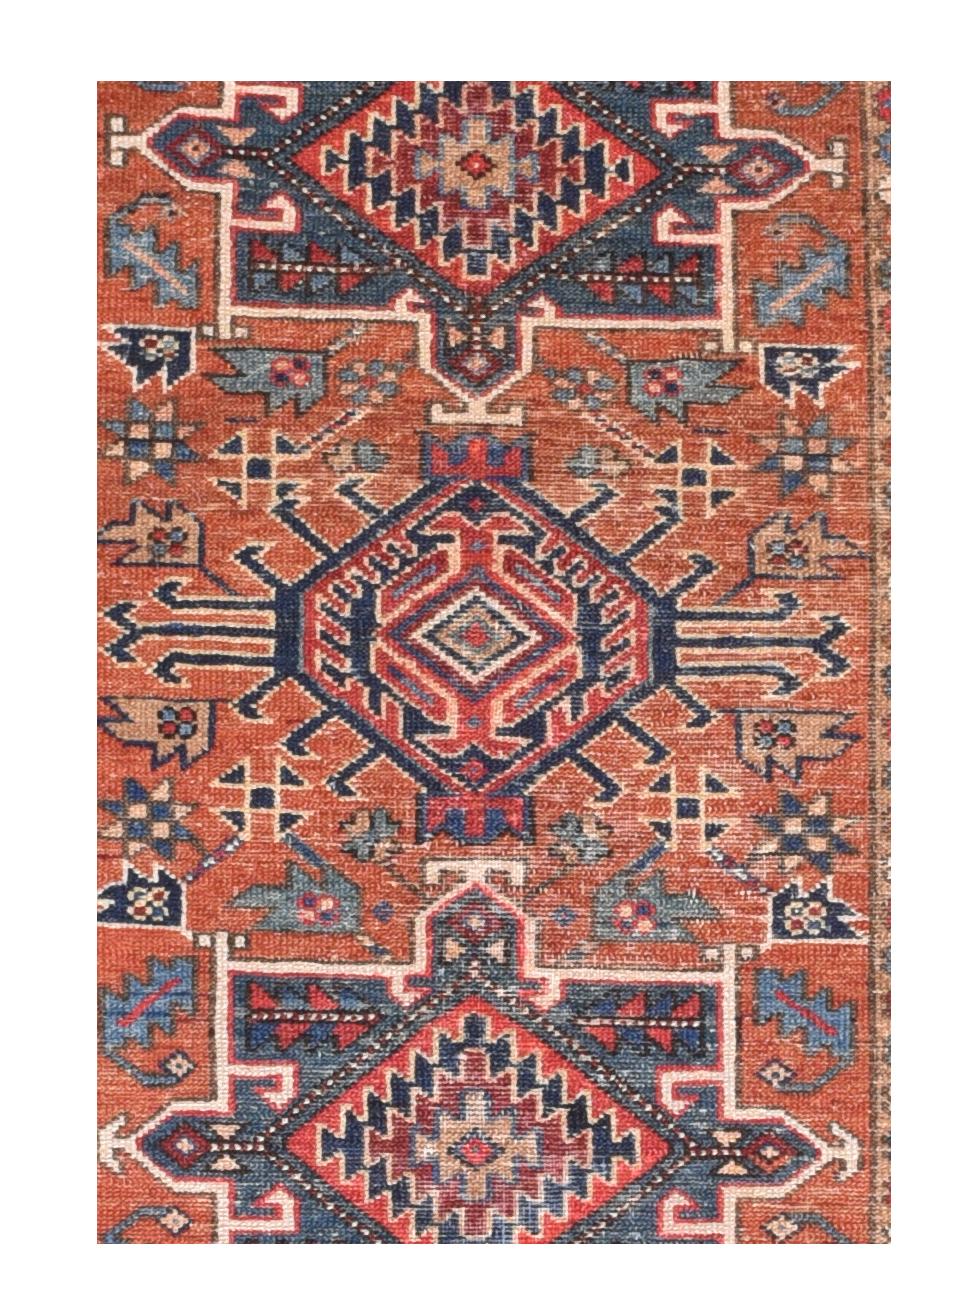 Fine antique Heriz Persian rug, hand knotted, circa 1890

Design: Three Medallion

Heriz rugs are Persian rugs from the area of Heris, East Azerbaijan in northwest Iran, northeast of Tabriz. Such rugs are produced in the village of the same name